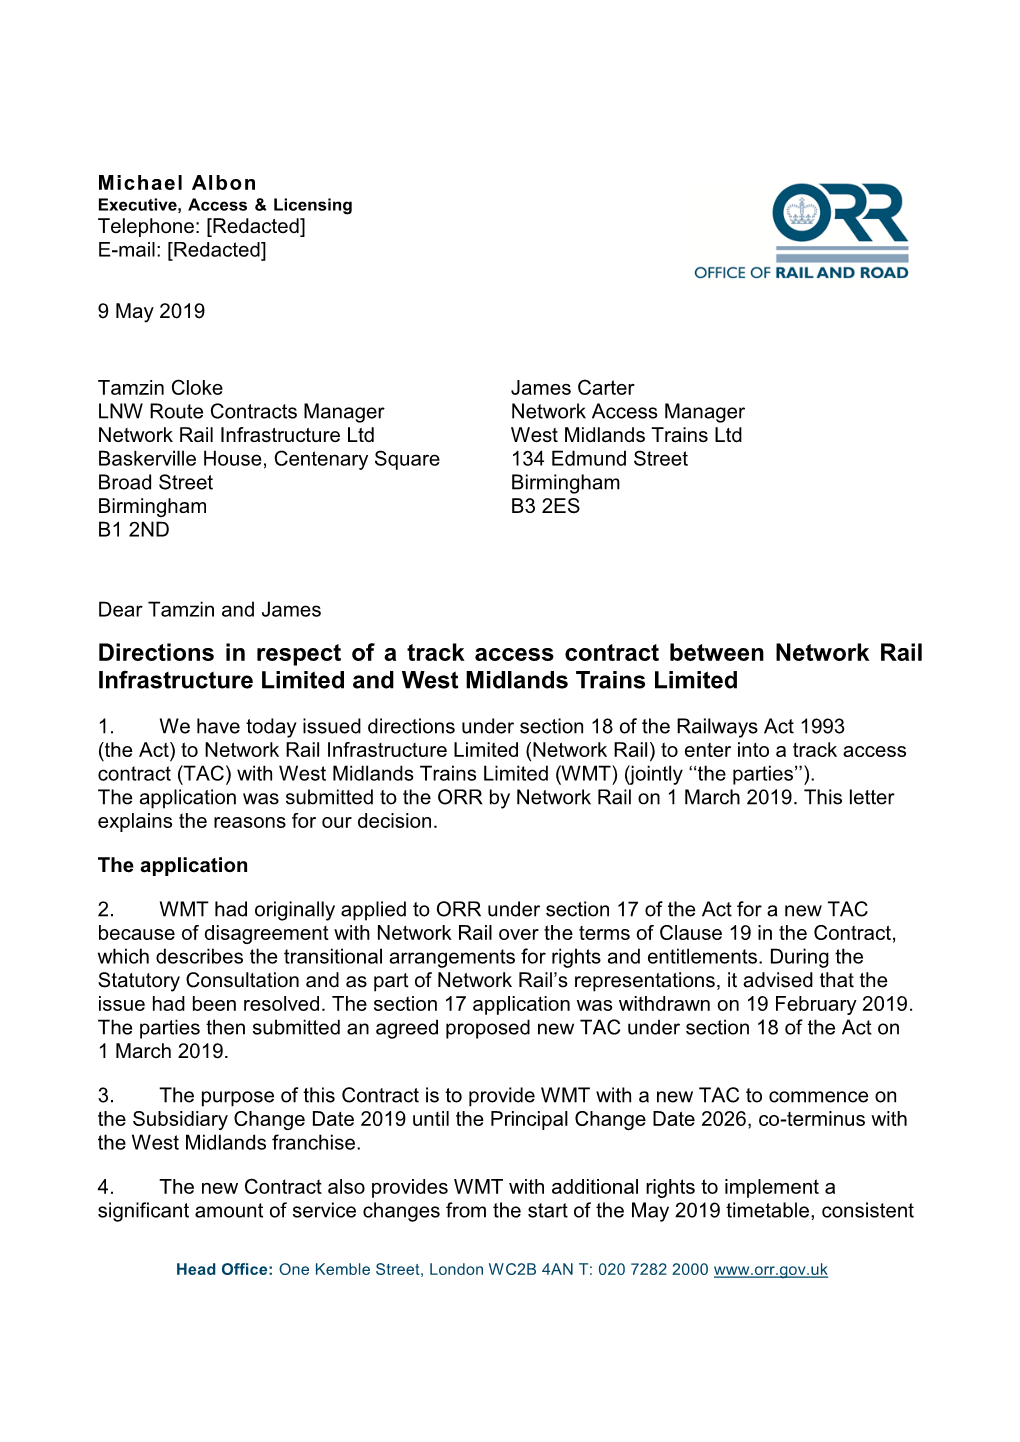 West Midlands Trains Limited New Track Access Contract Decision Letter